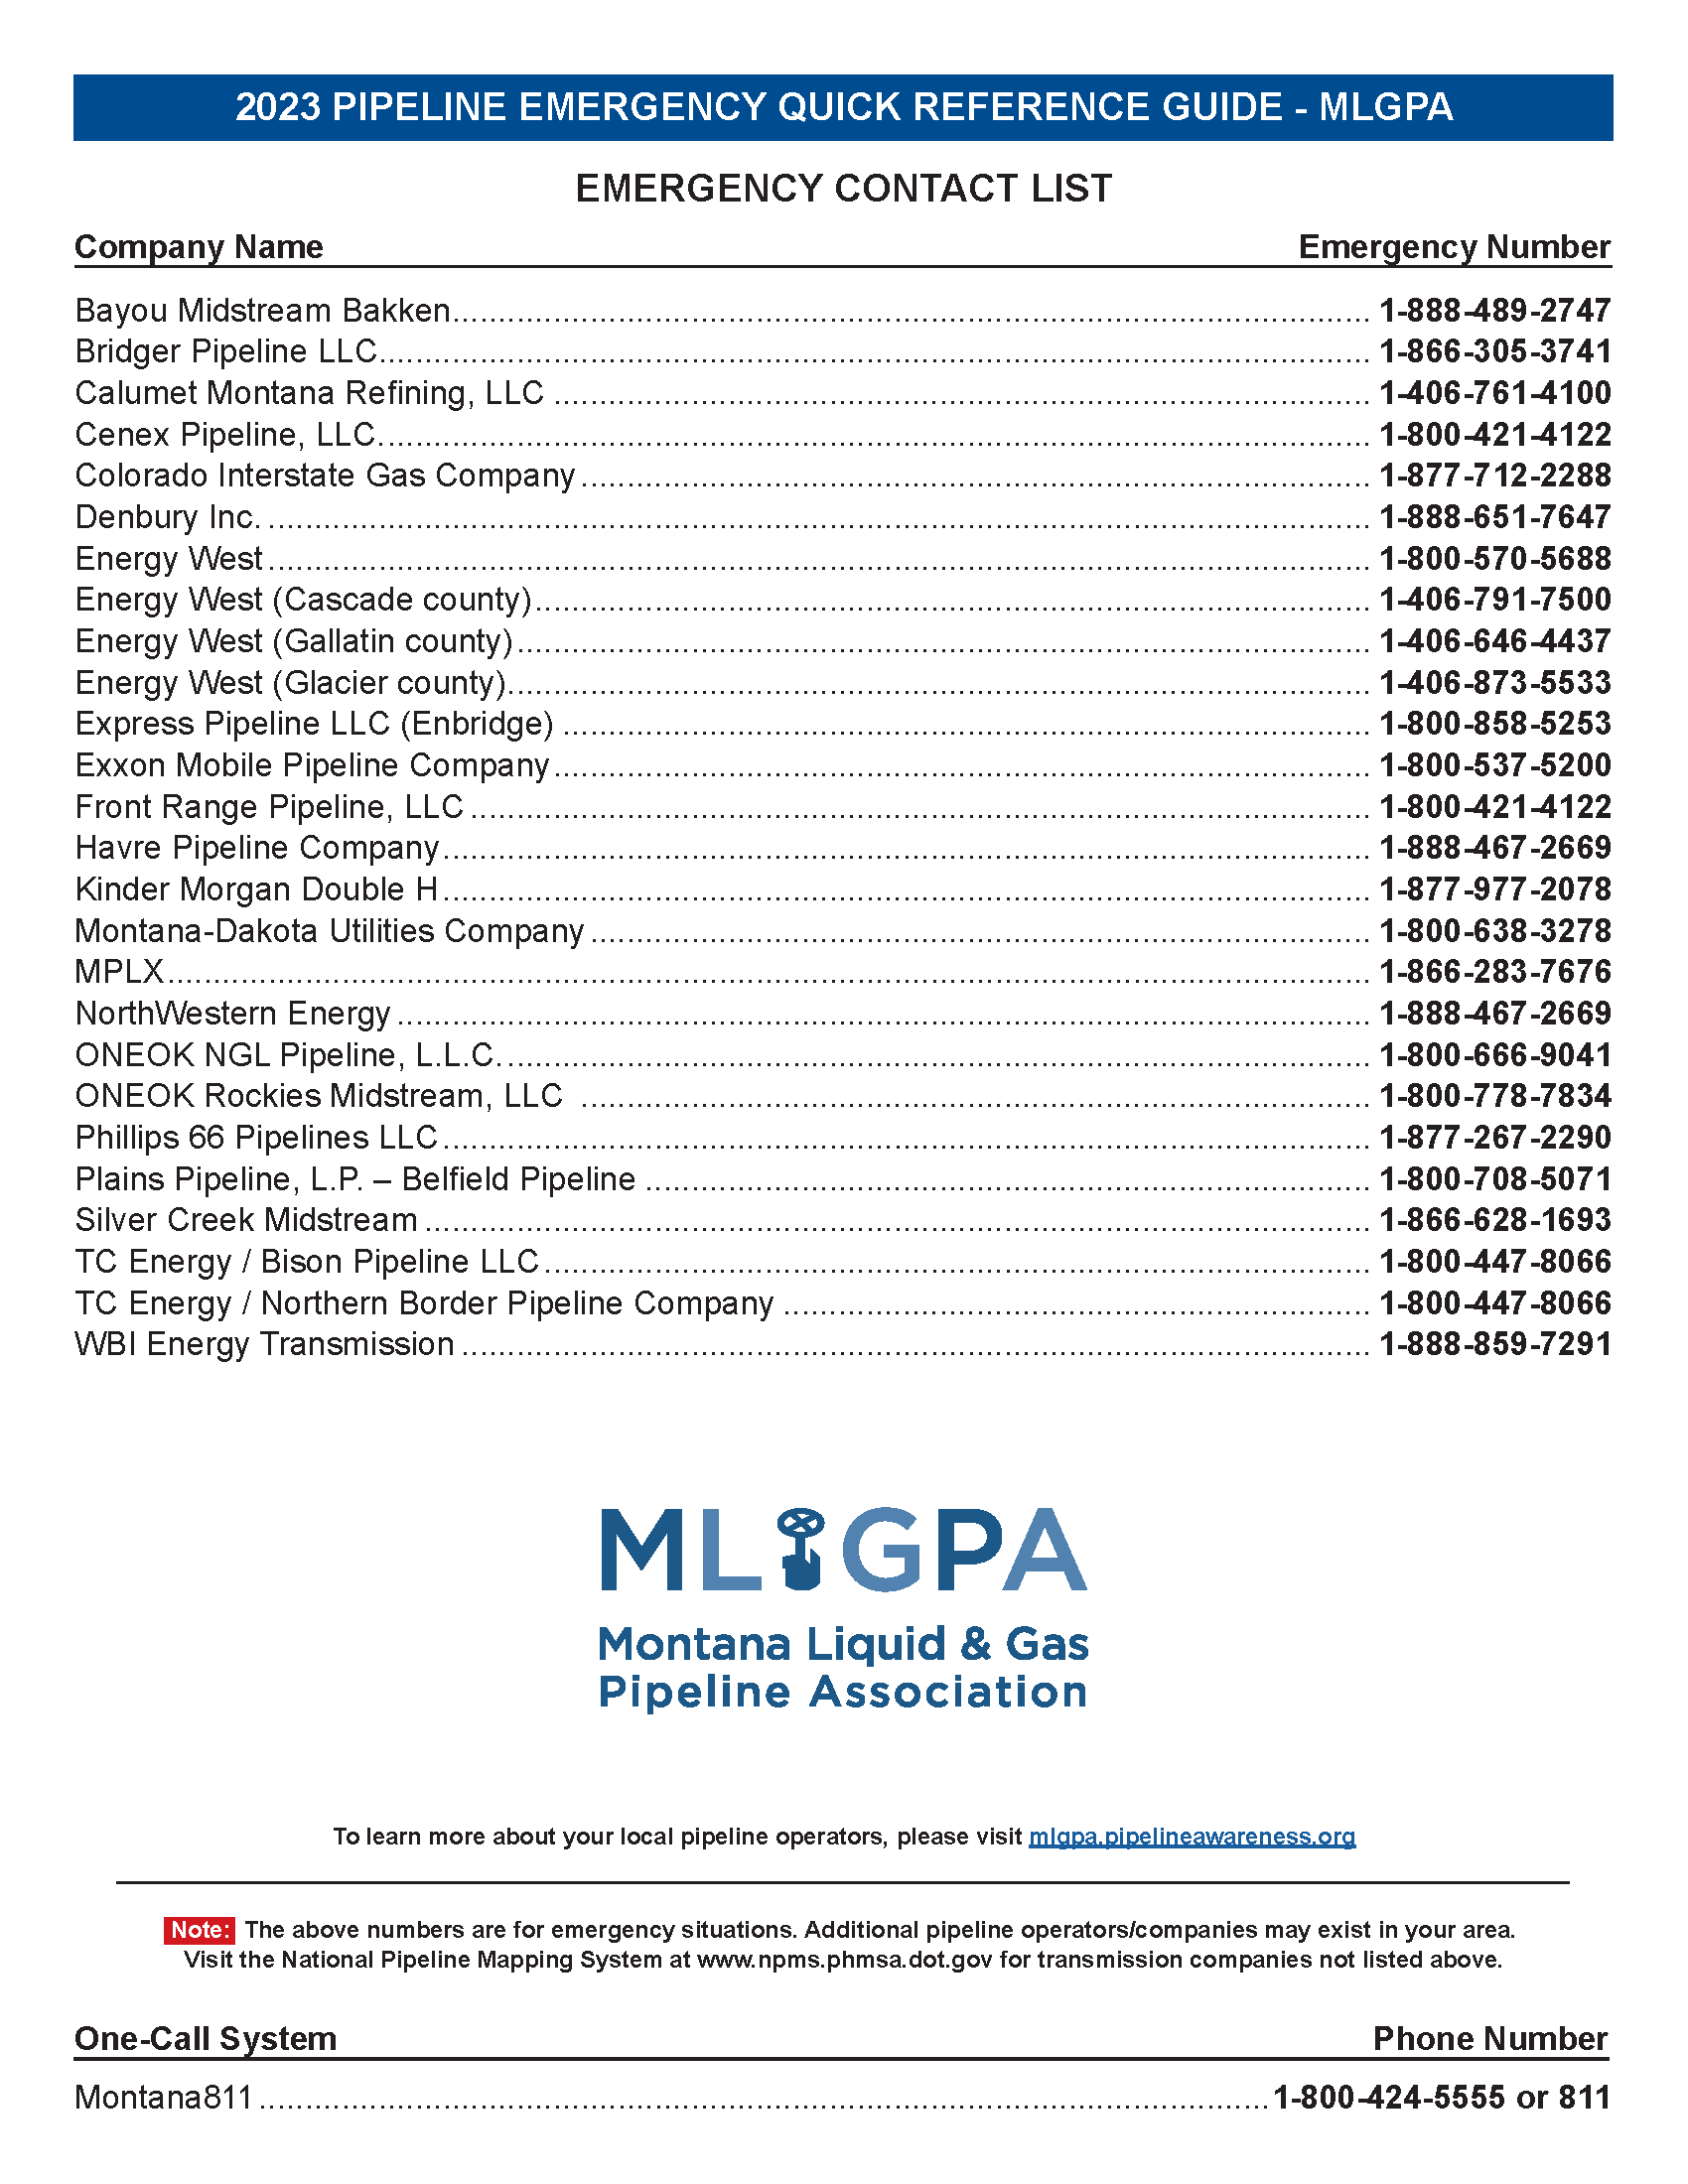 Download the 2023 MLGPA Quick Reference Guide